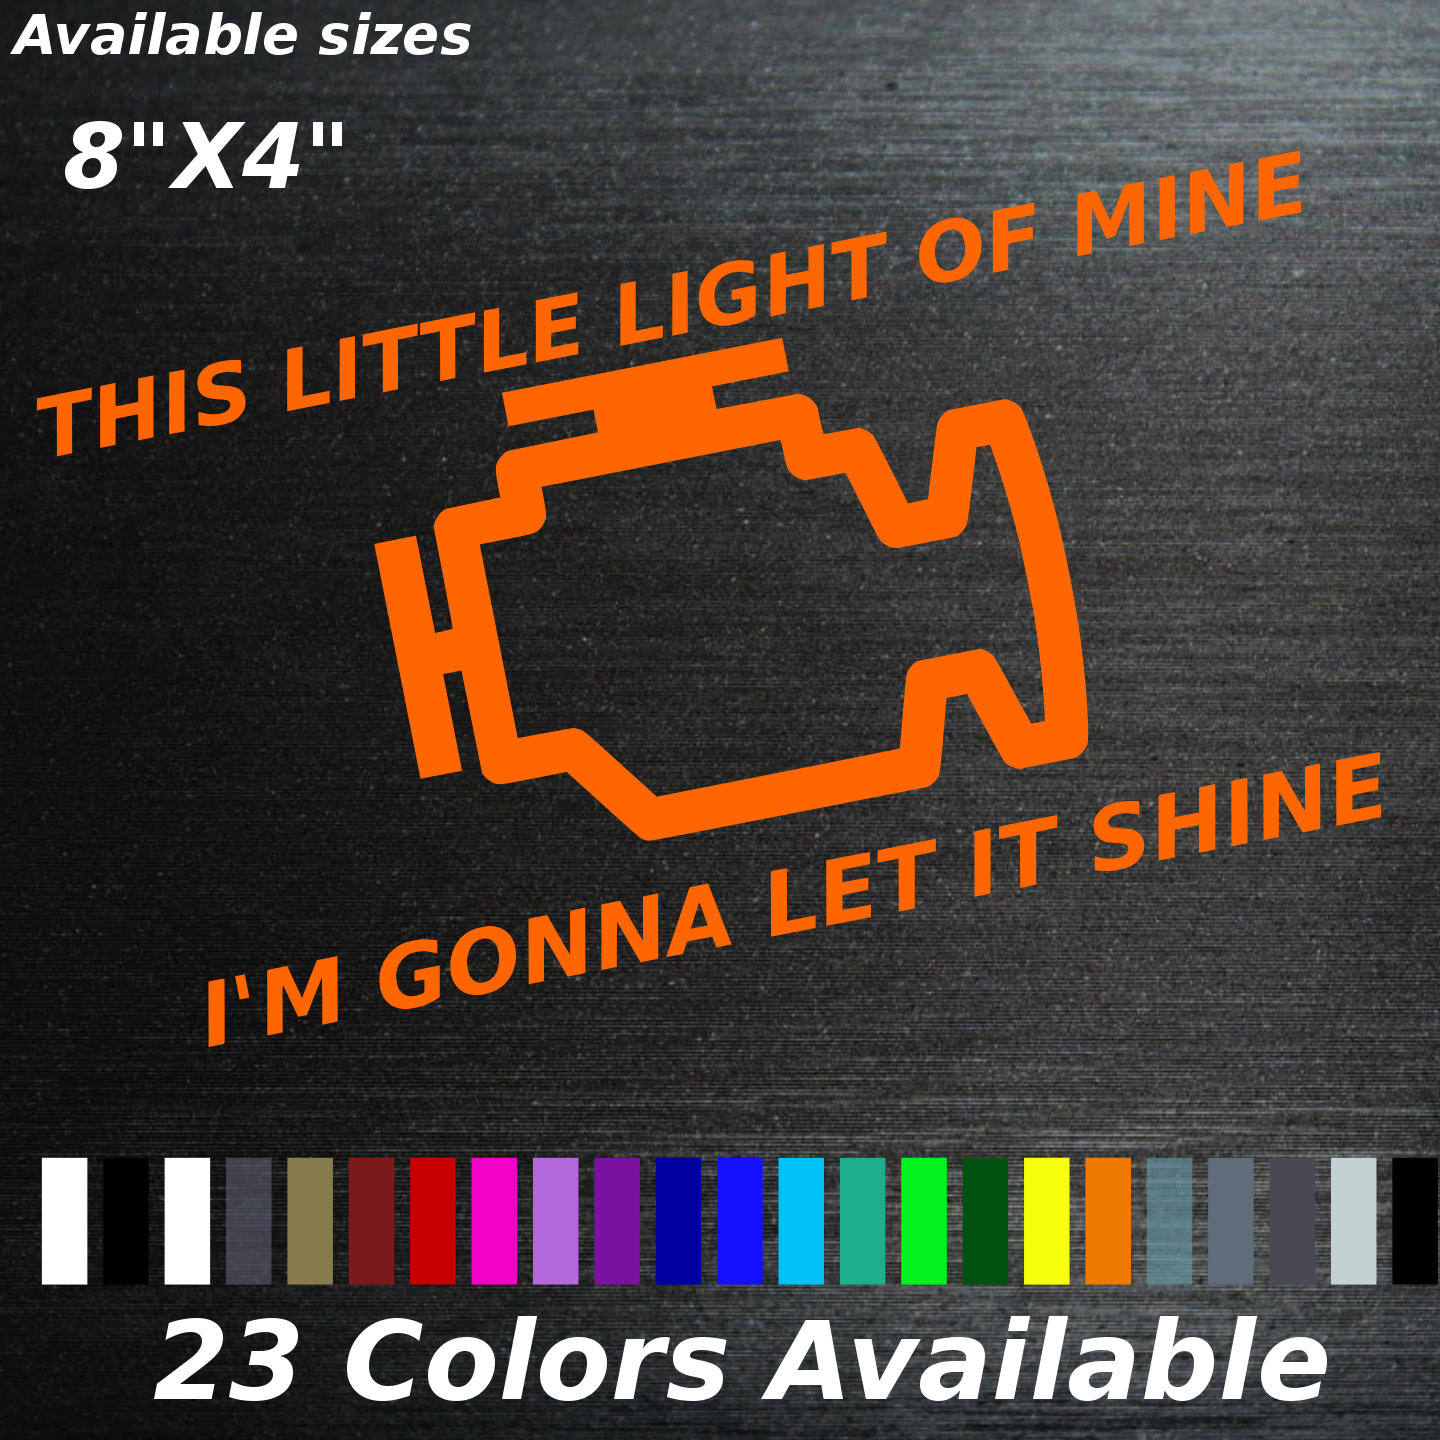 This little light of mine Check engine light decal sticker let it shine cars